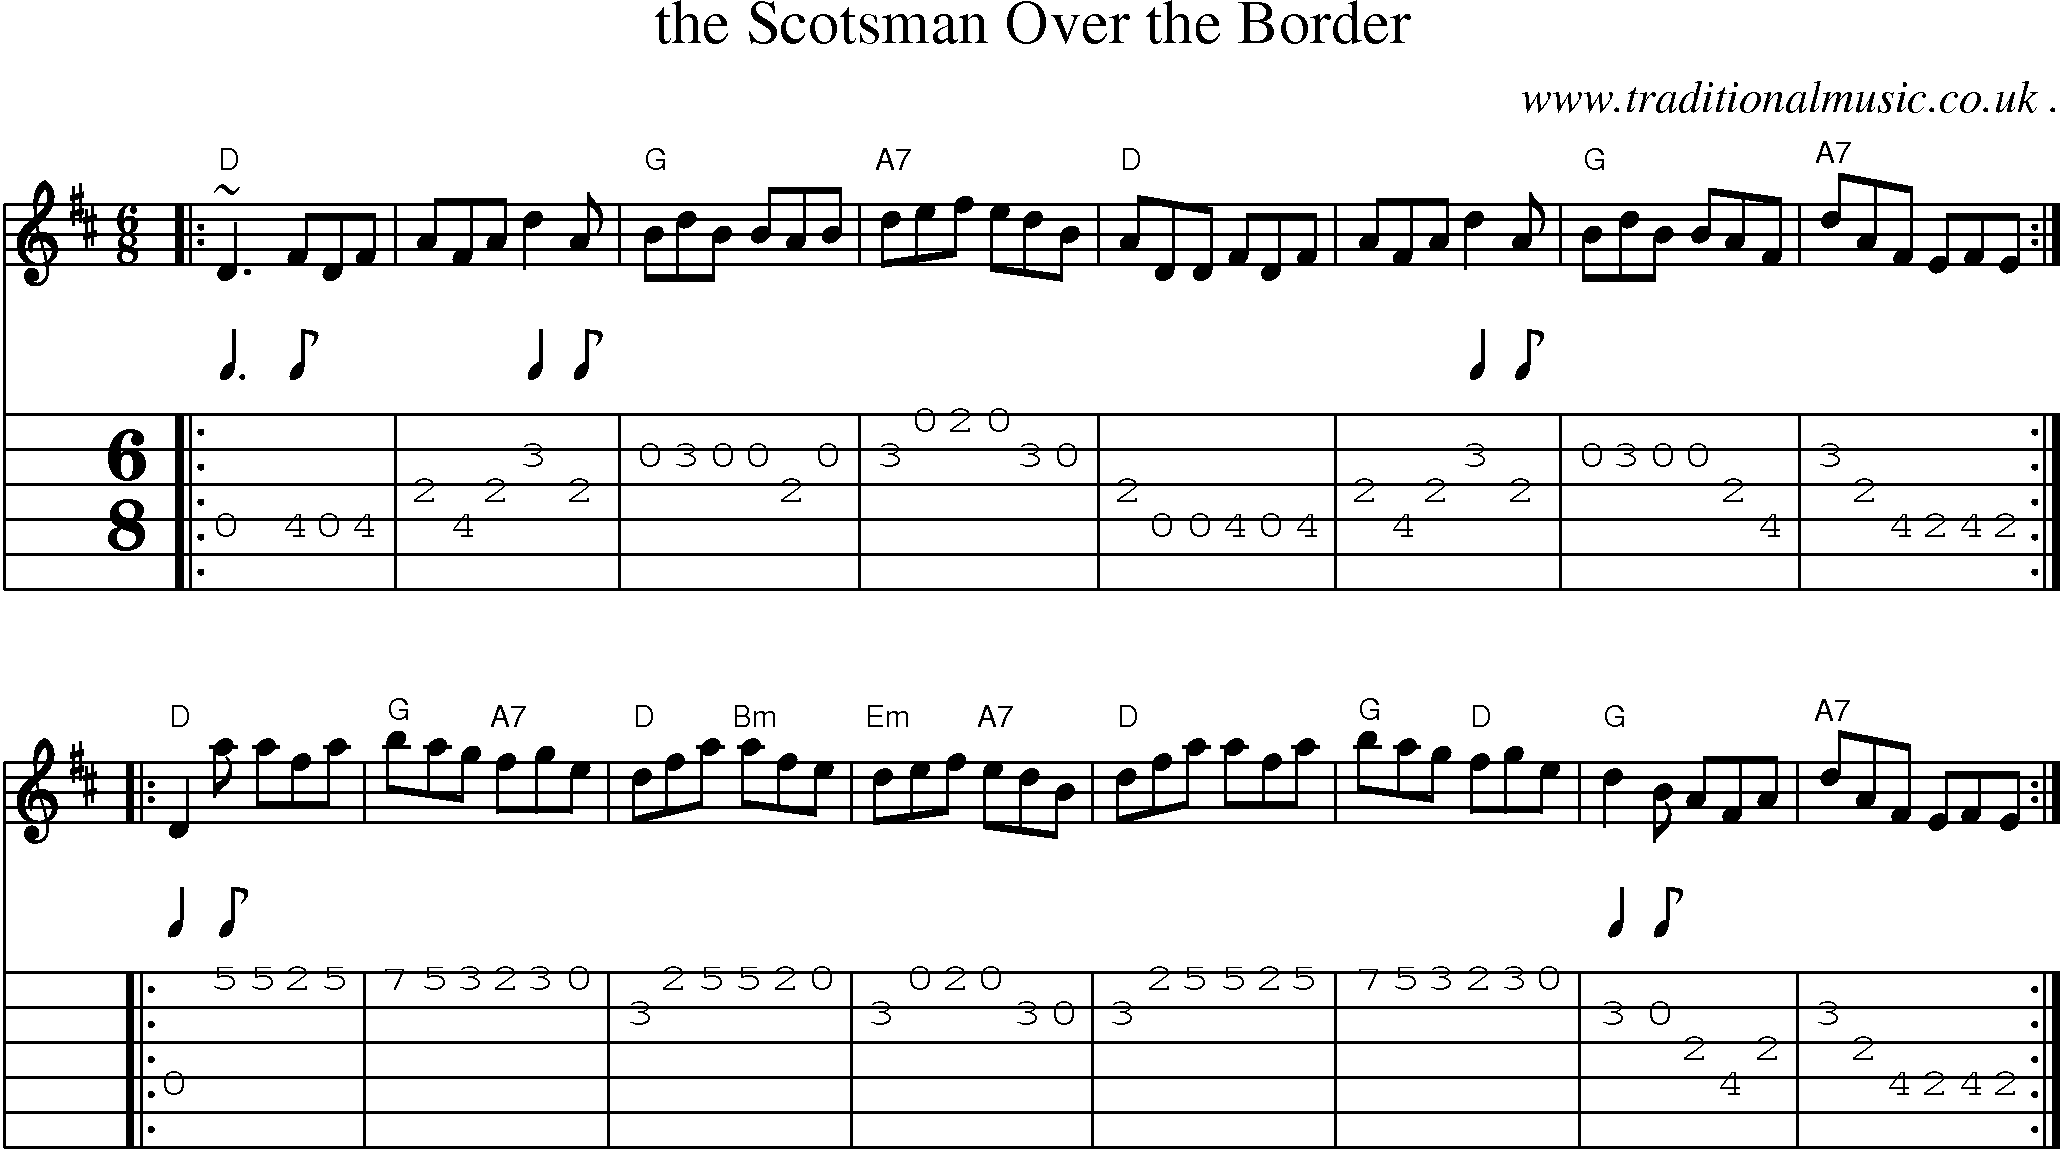 Sheet-music  score, Chords and Guitar Tabs for The Scotsman Over The Border